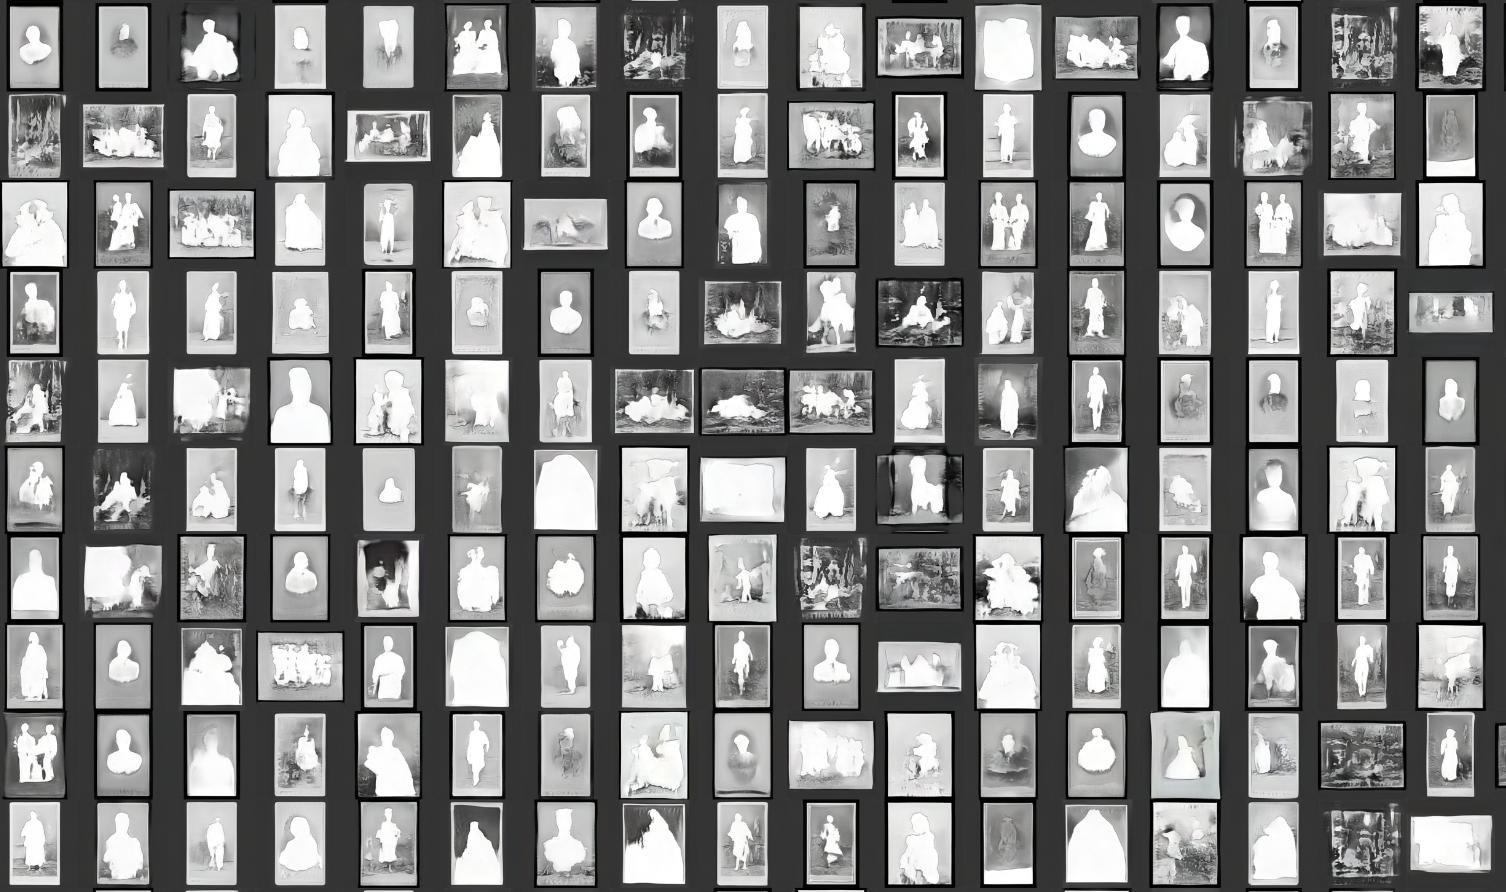 A grid of images in black and white